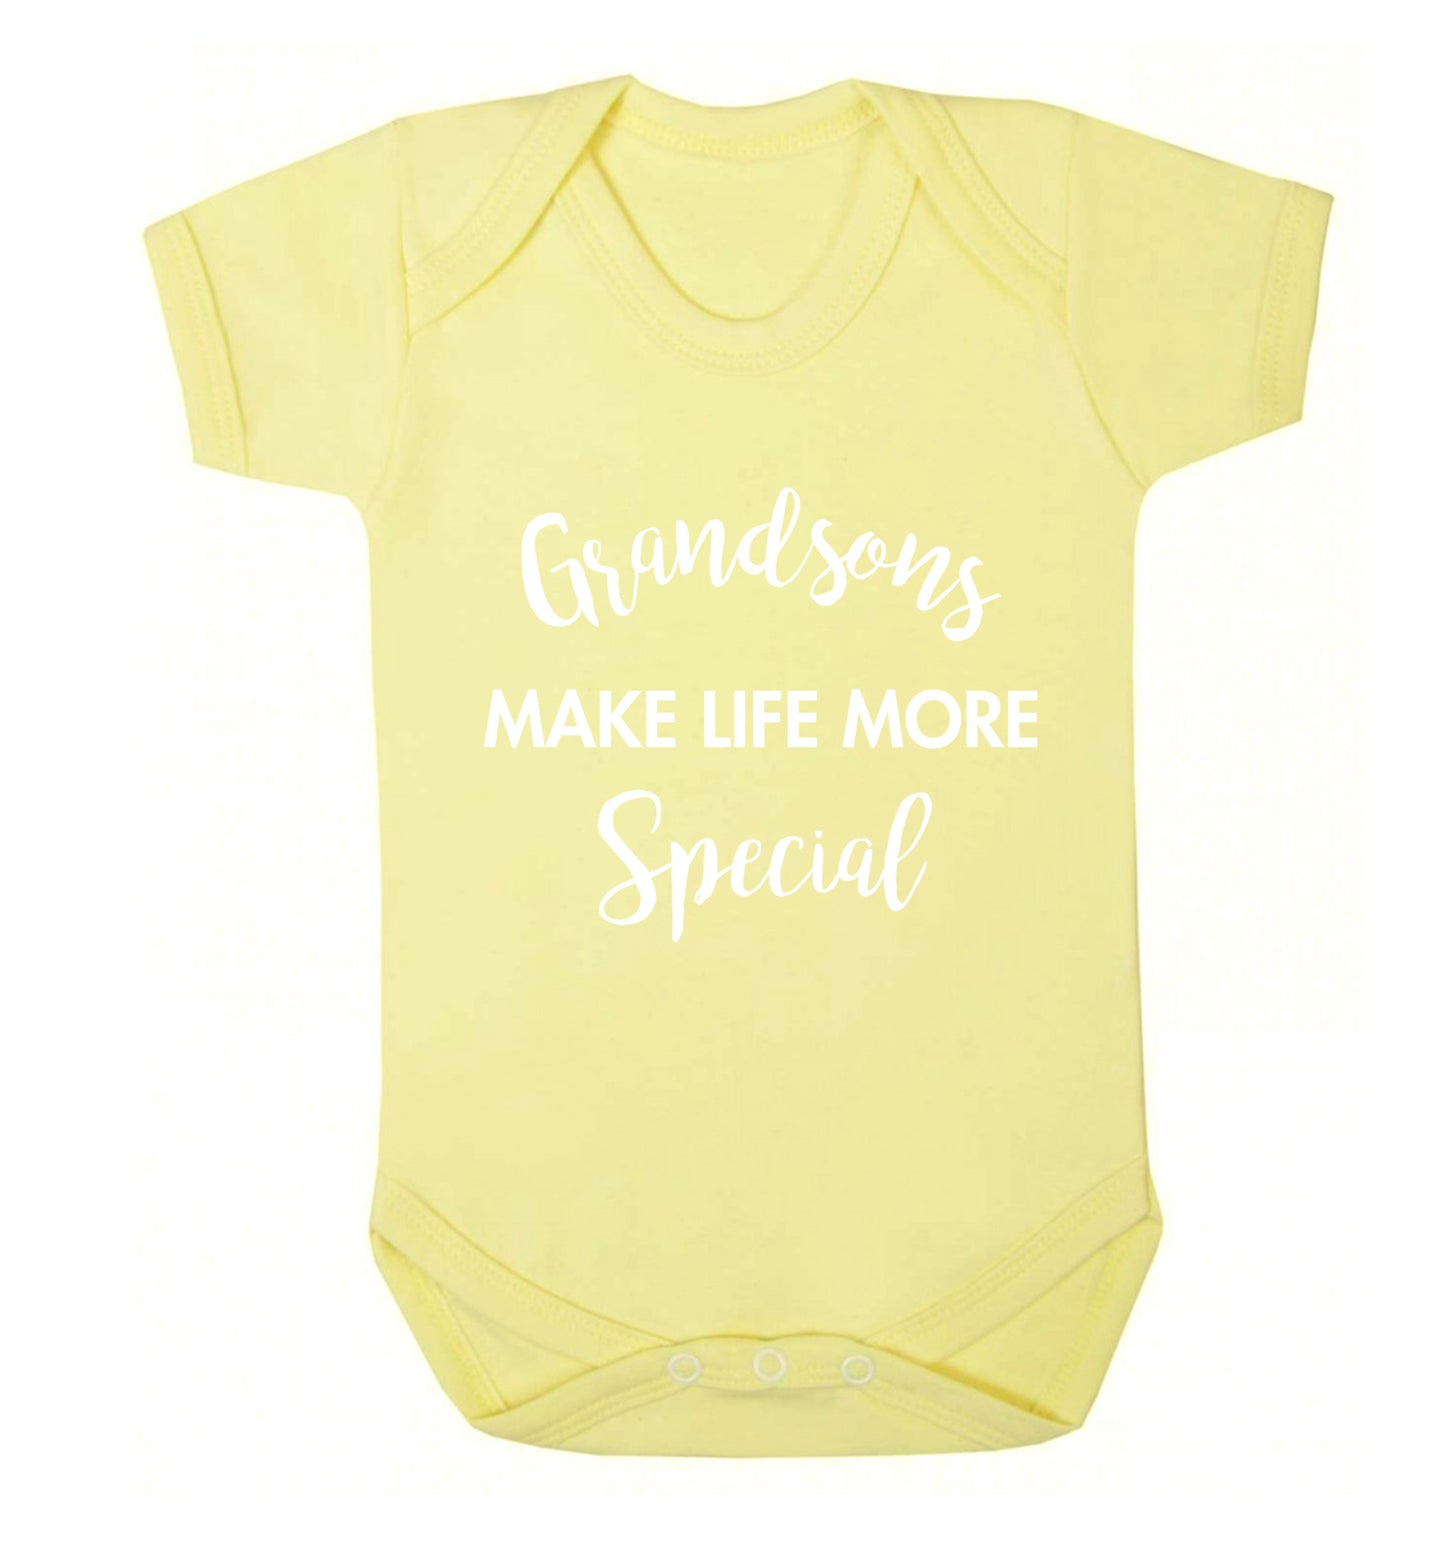 Grandsons make life more special Baby Vest pale yellow 18-24 months